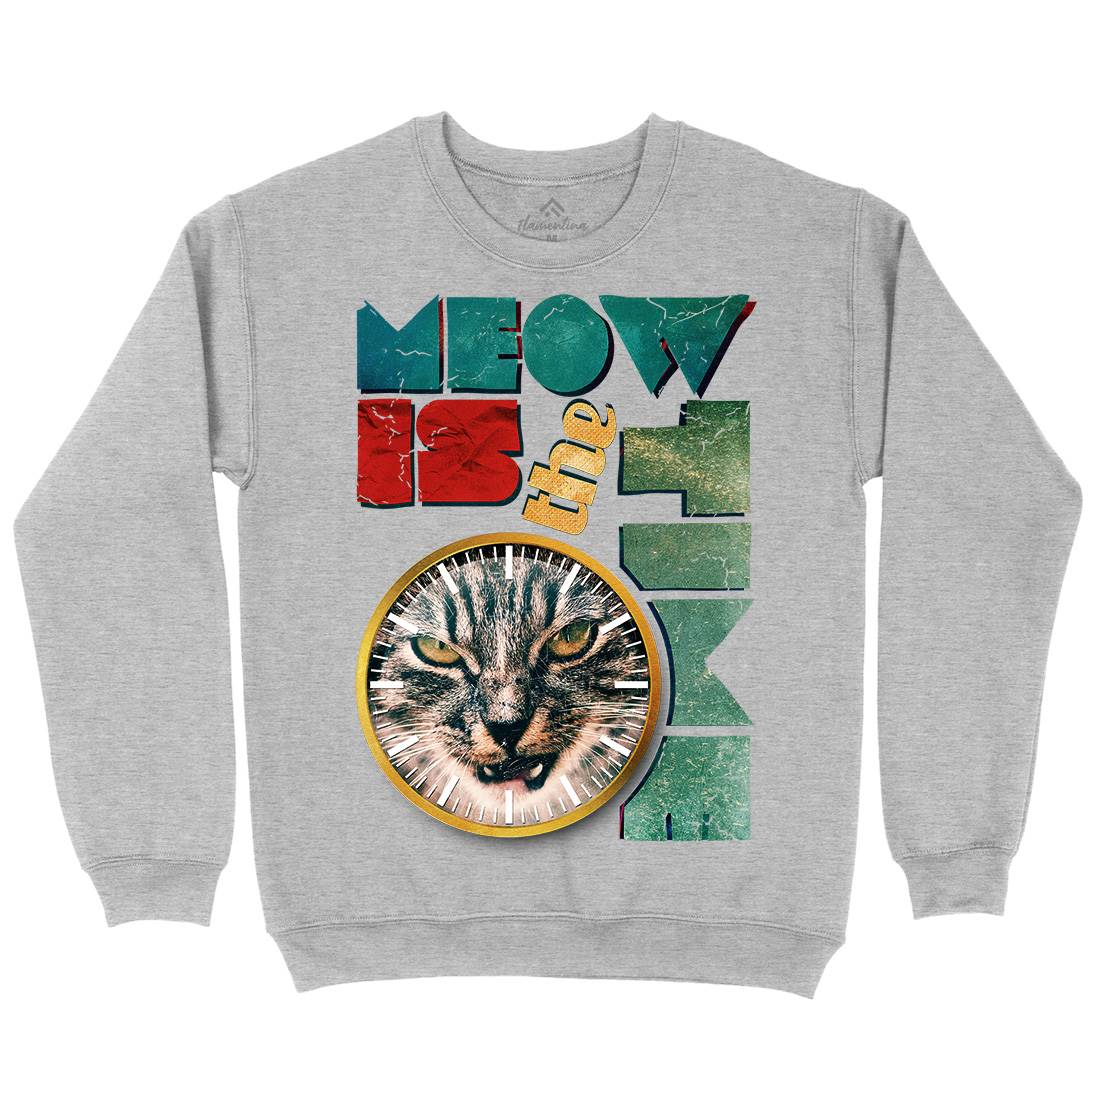 Meow Is The Time Mens Crew Neck Sweatshirt Animals A876